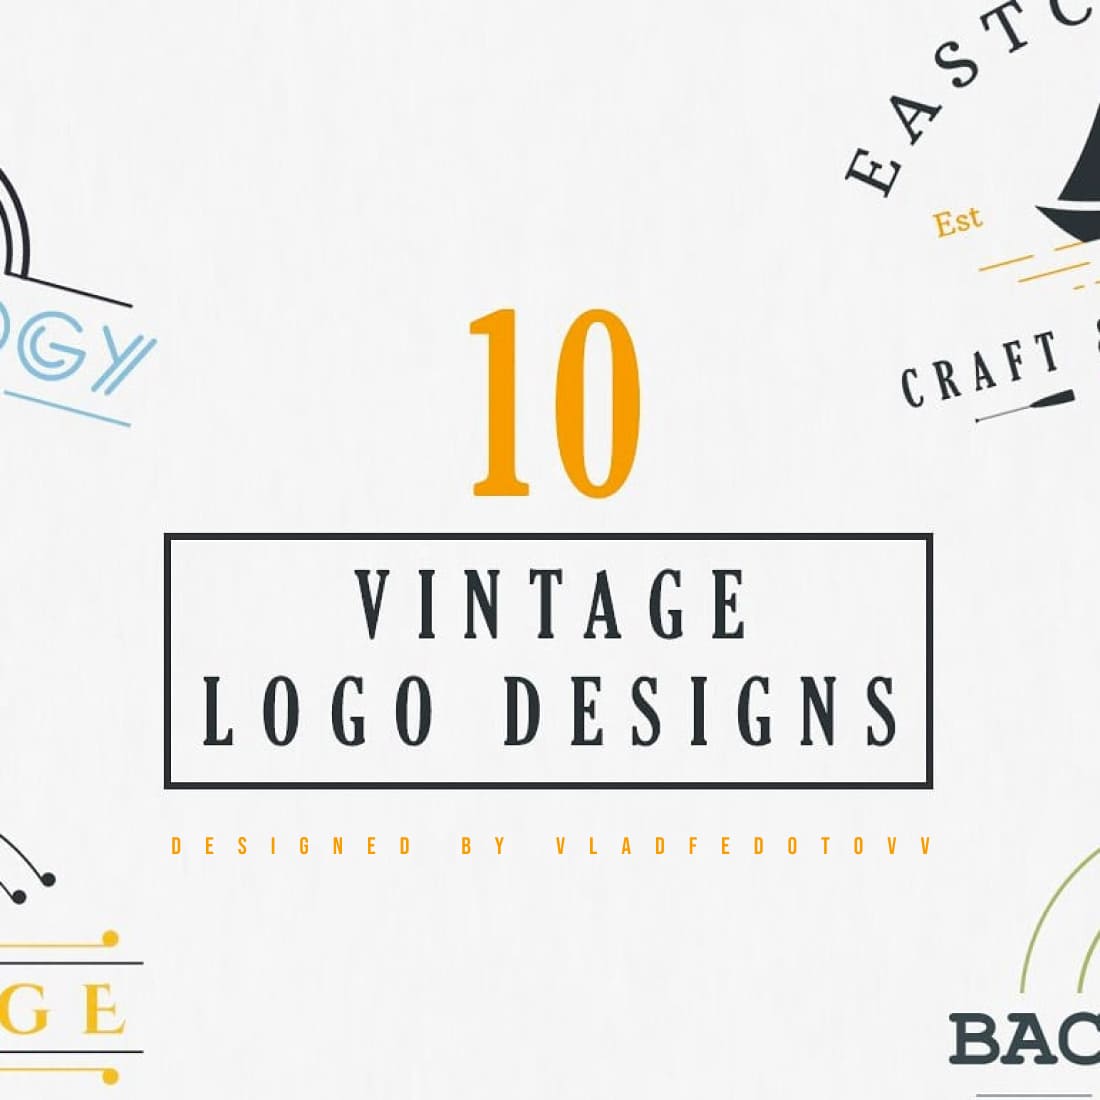 Vintage Logo Designs with 90 OFF cover image.